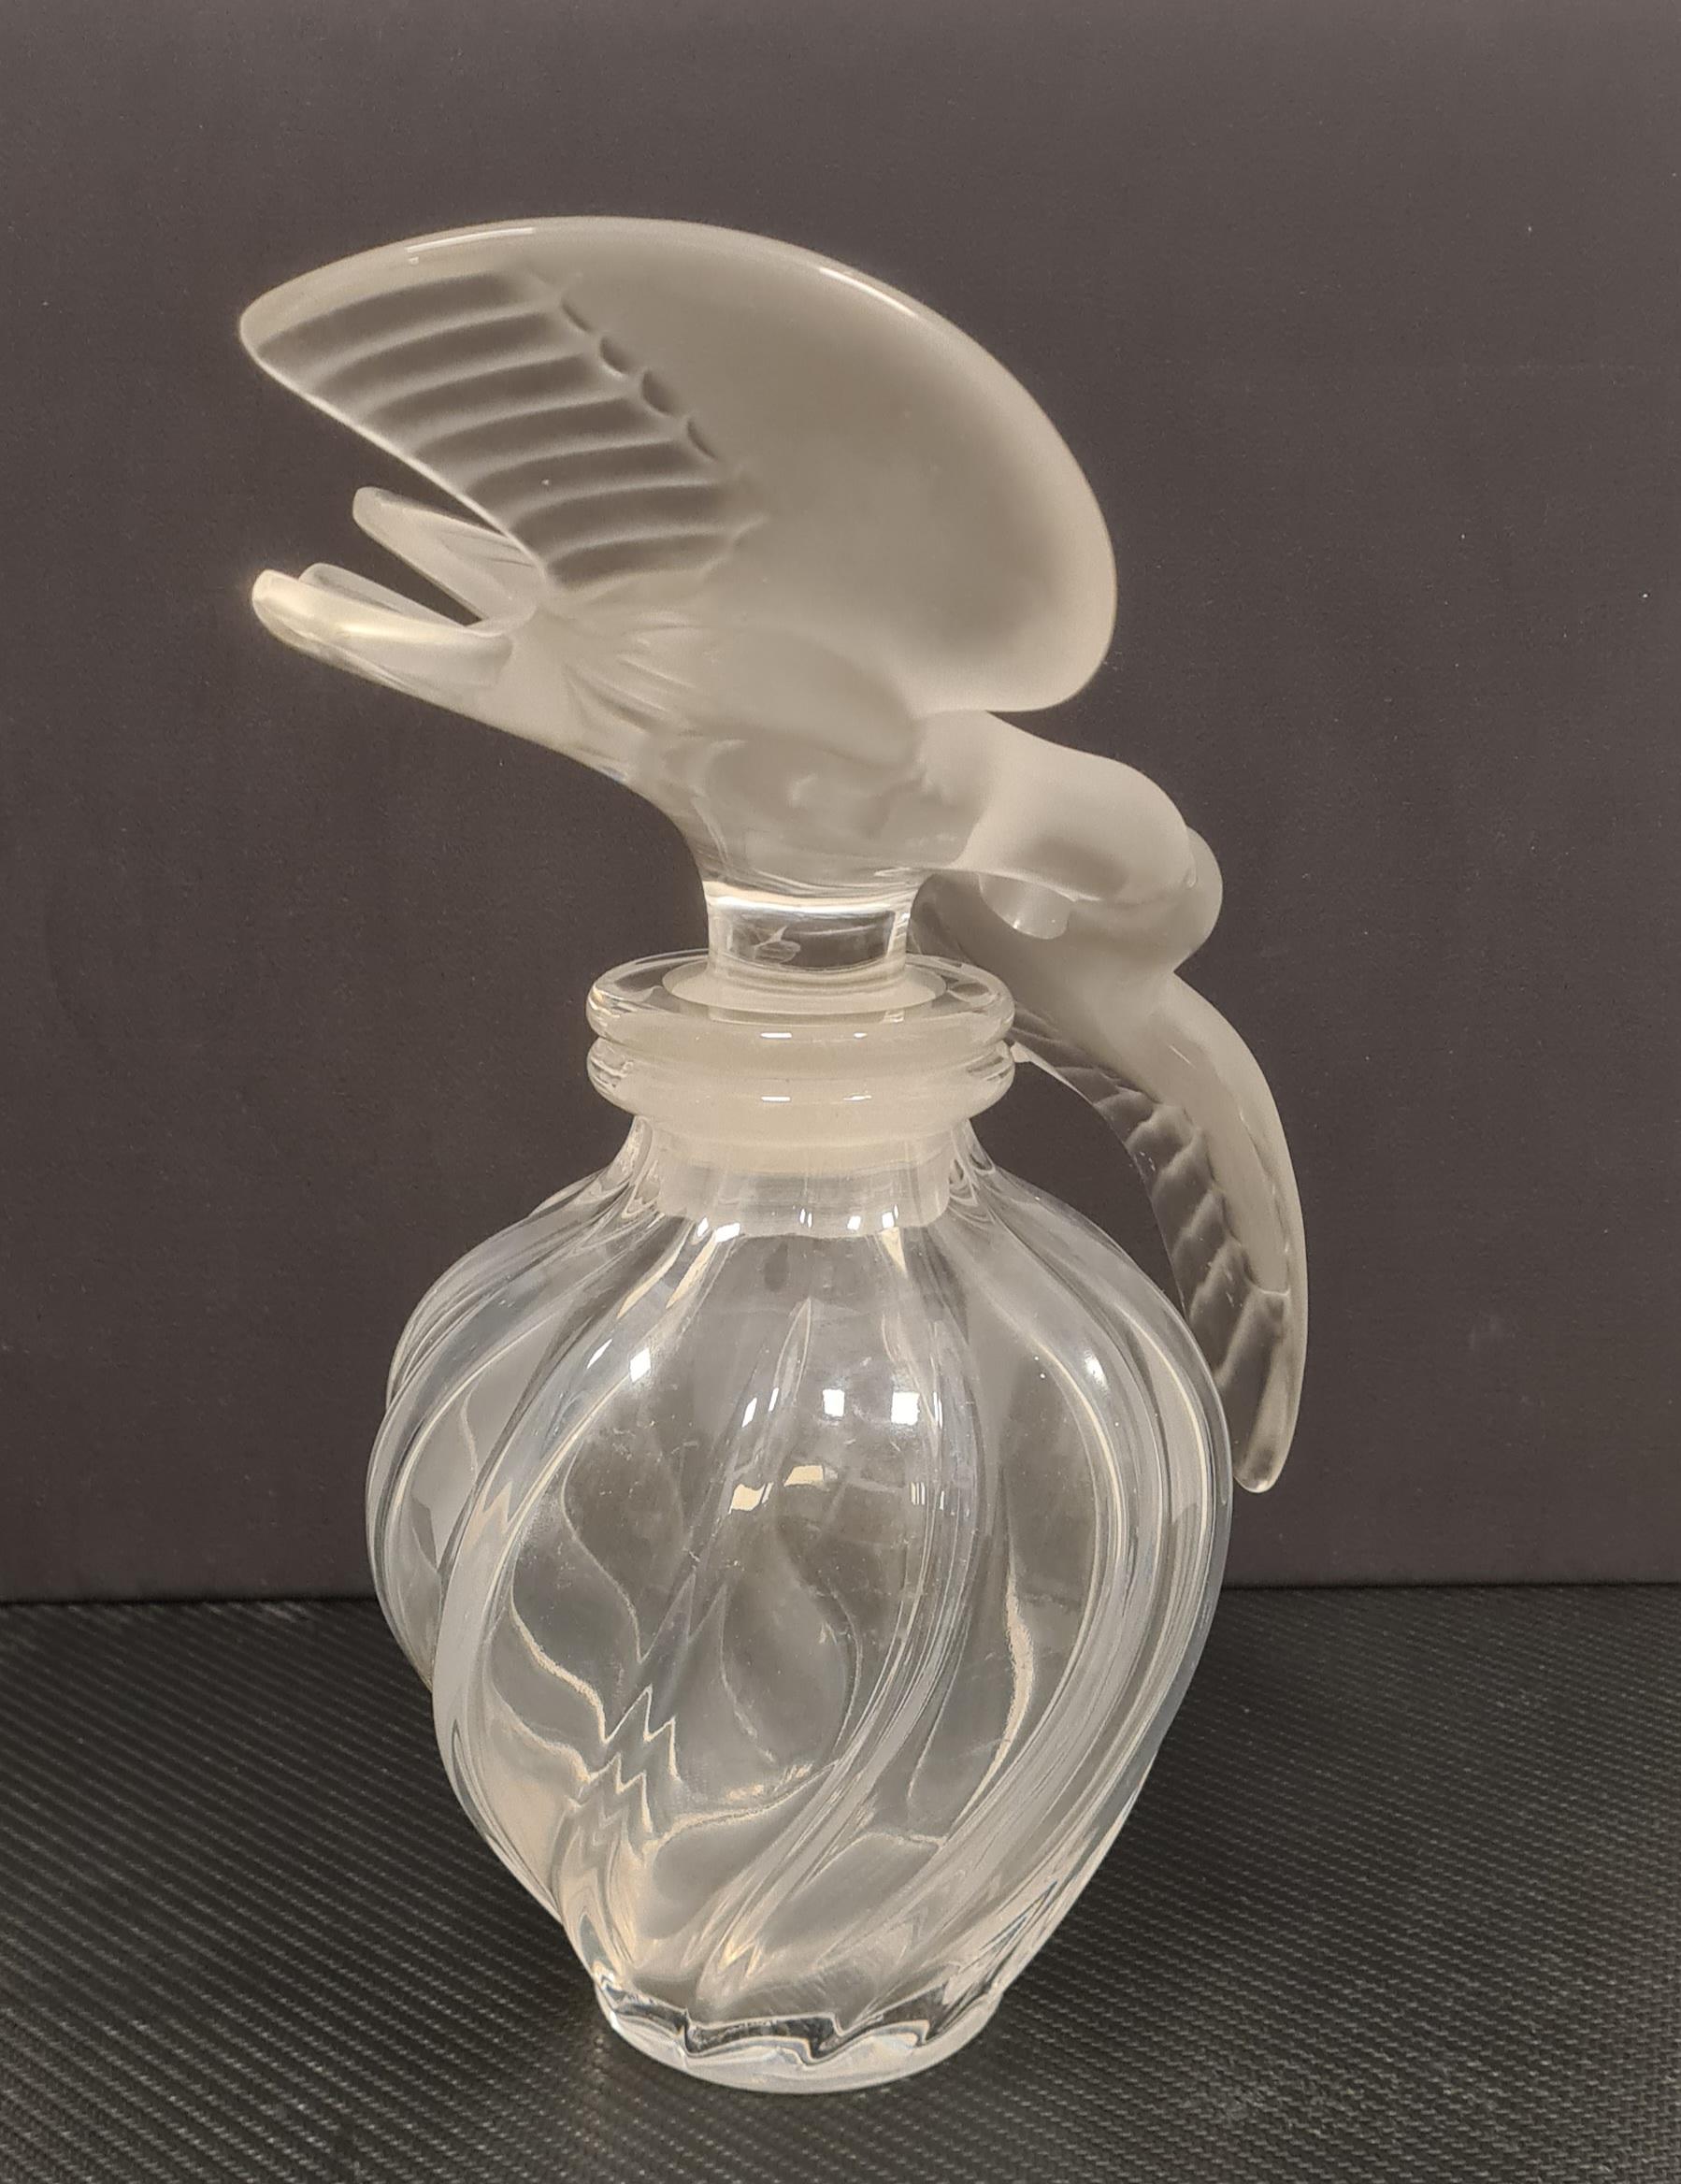 Large collectible Lalique glass bottle of the perfume L'air du temps In Fair Condition For Sale In Torino, IT